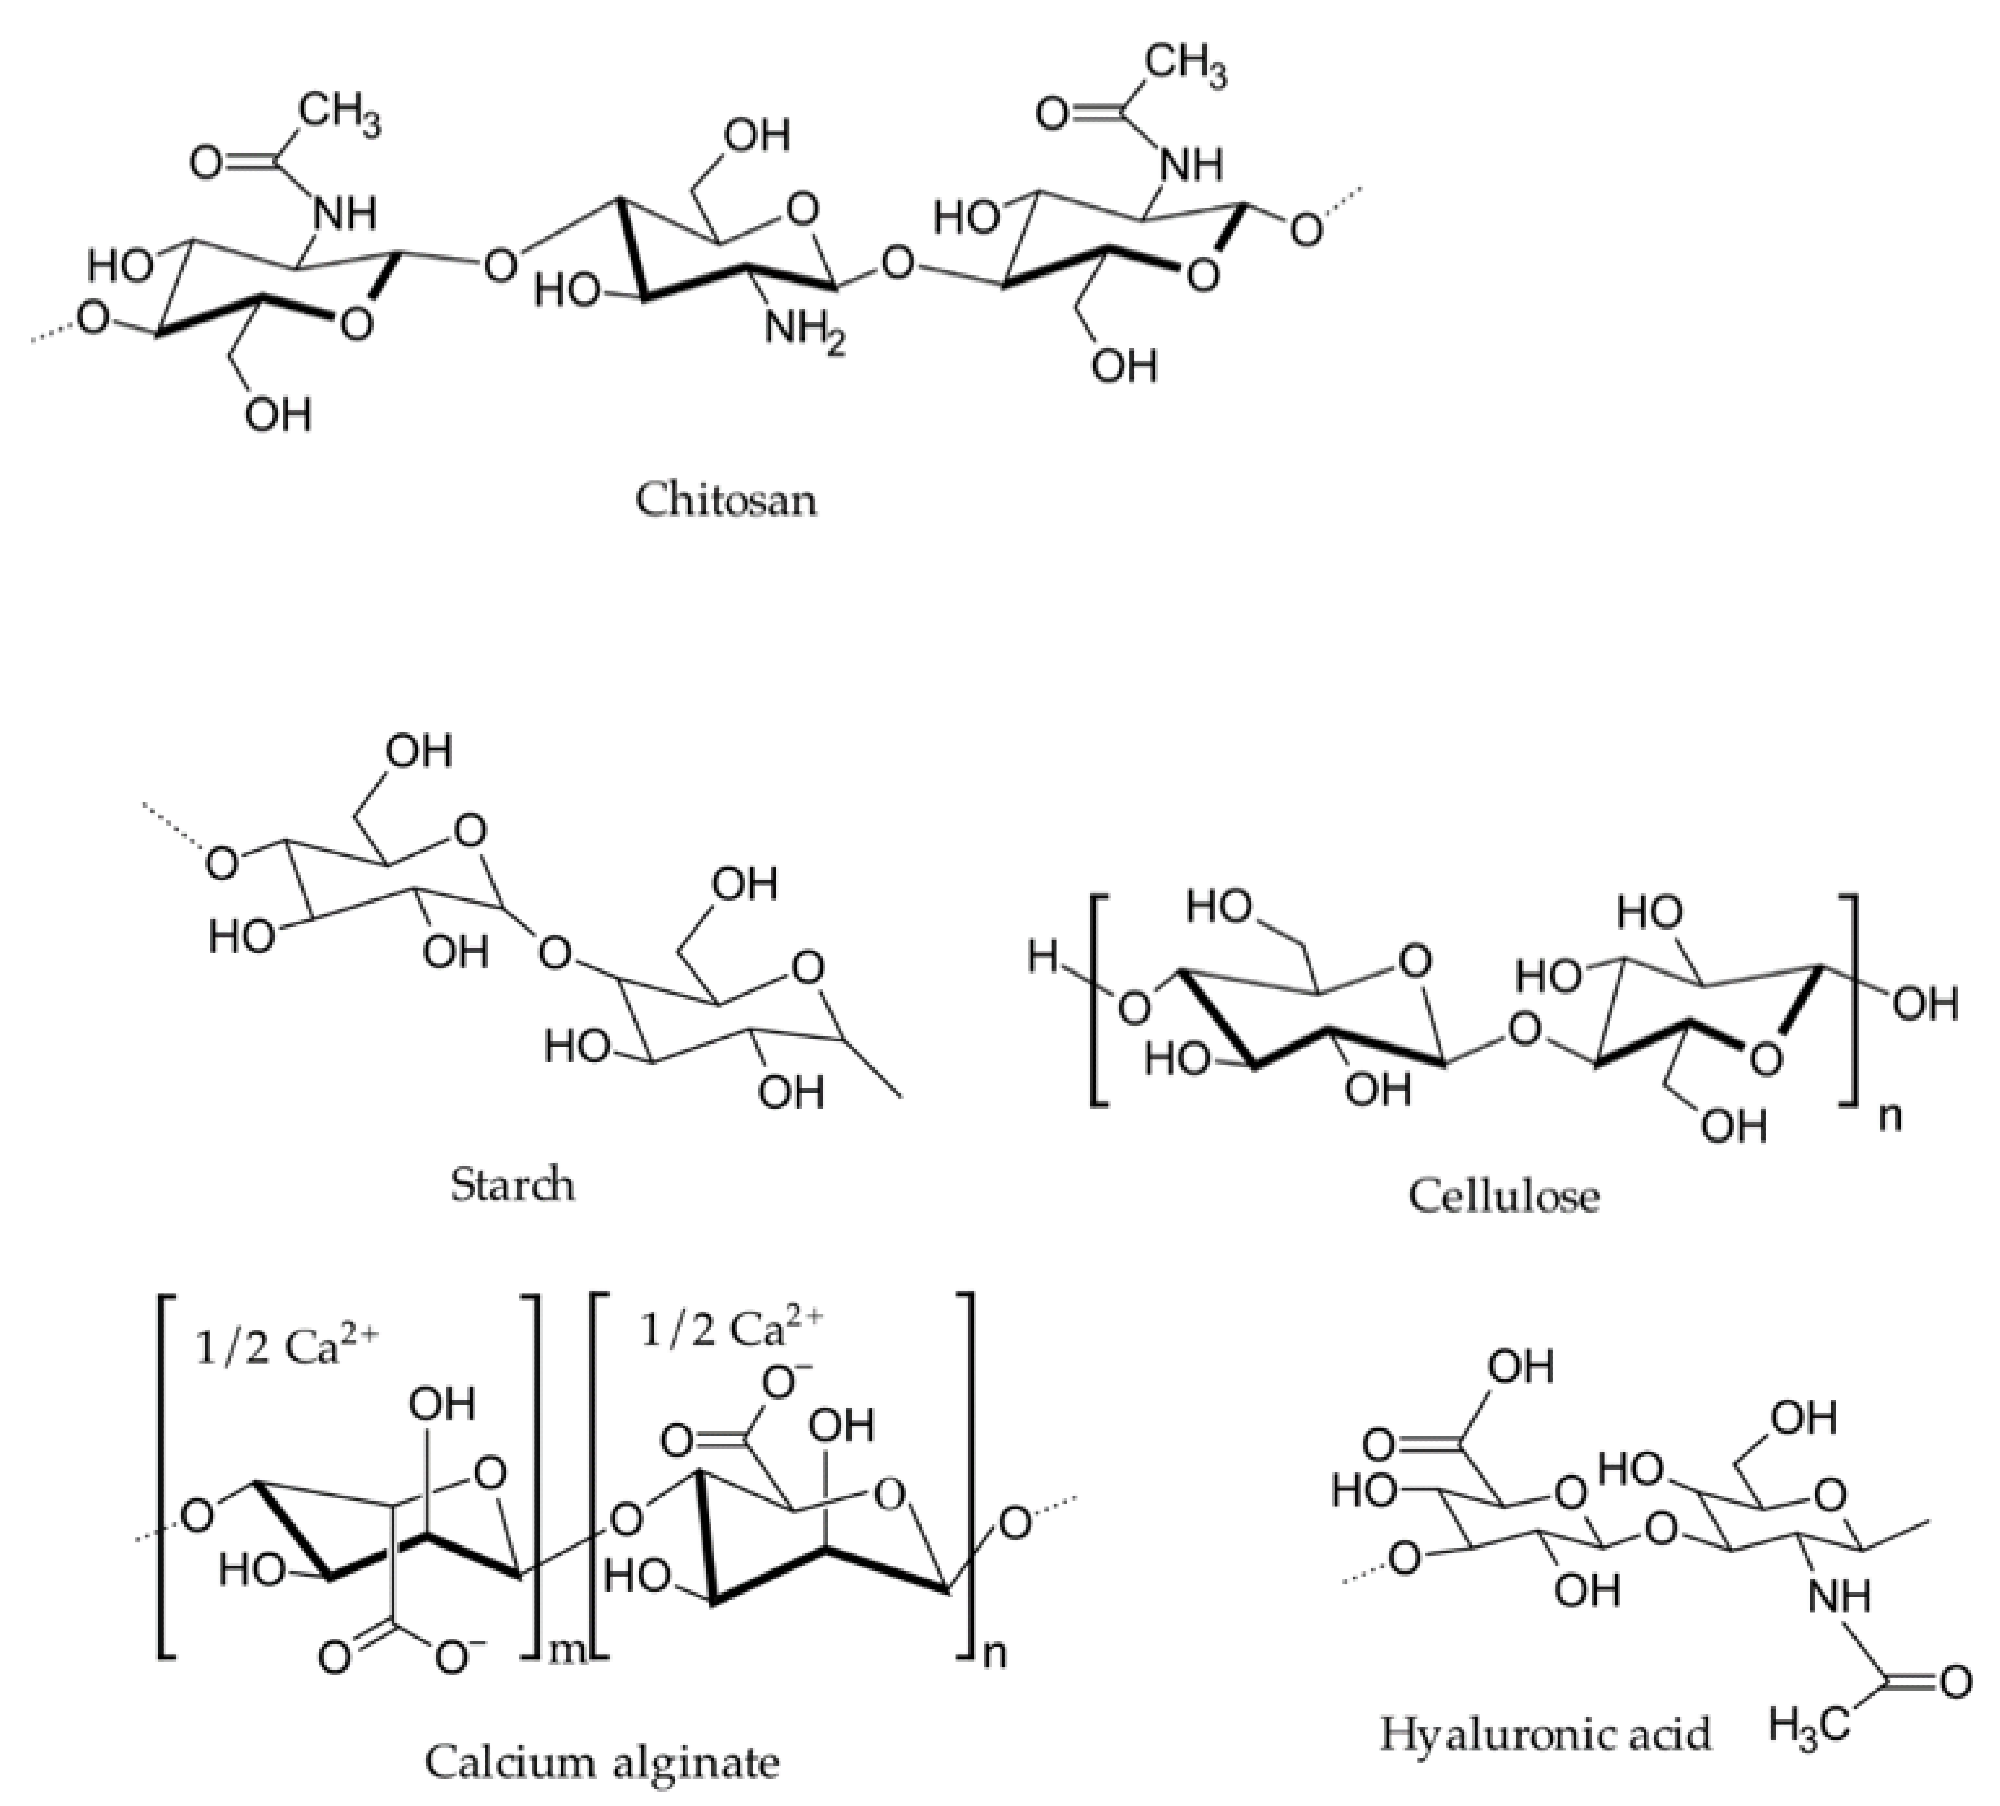 Representative chemical structures of naturally occurring hemostatic polymers.